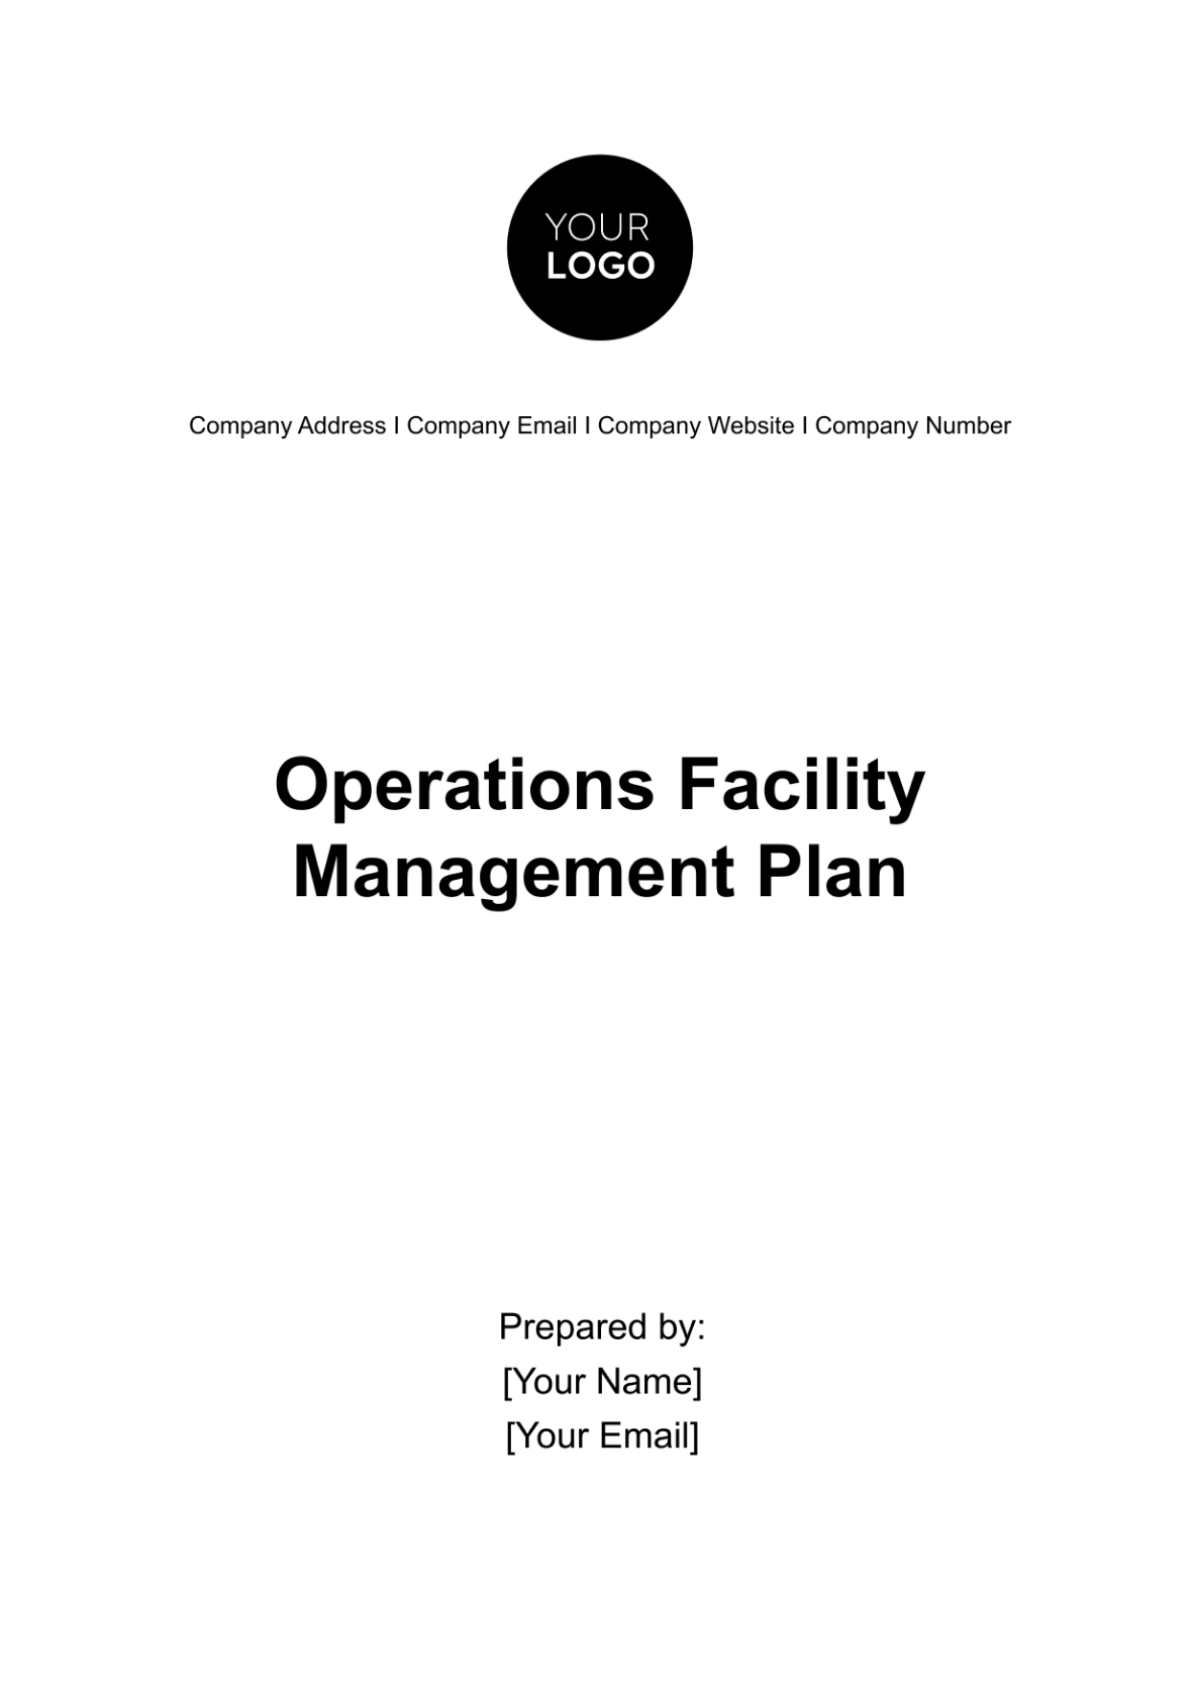 Operations Facility Management Plan Template